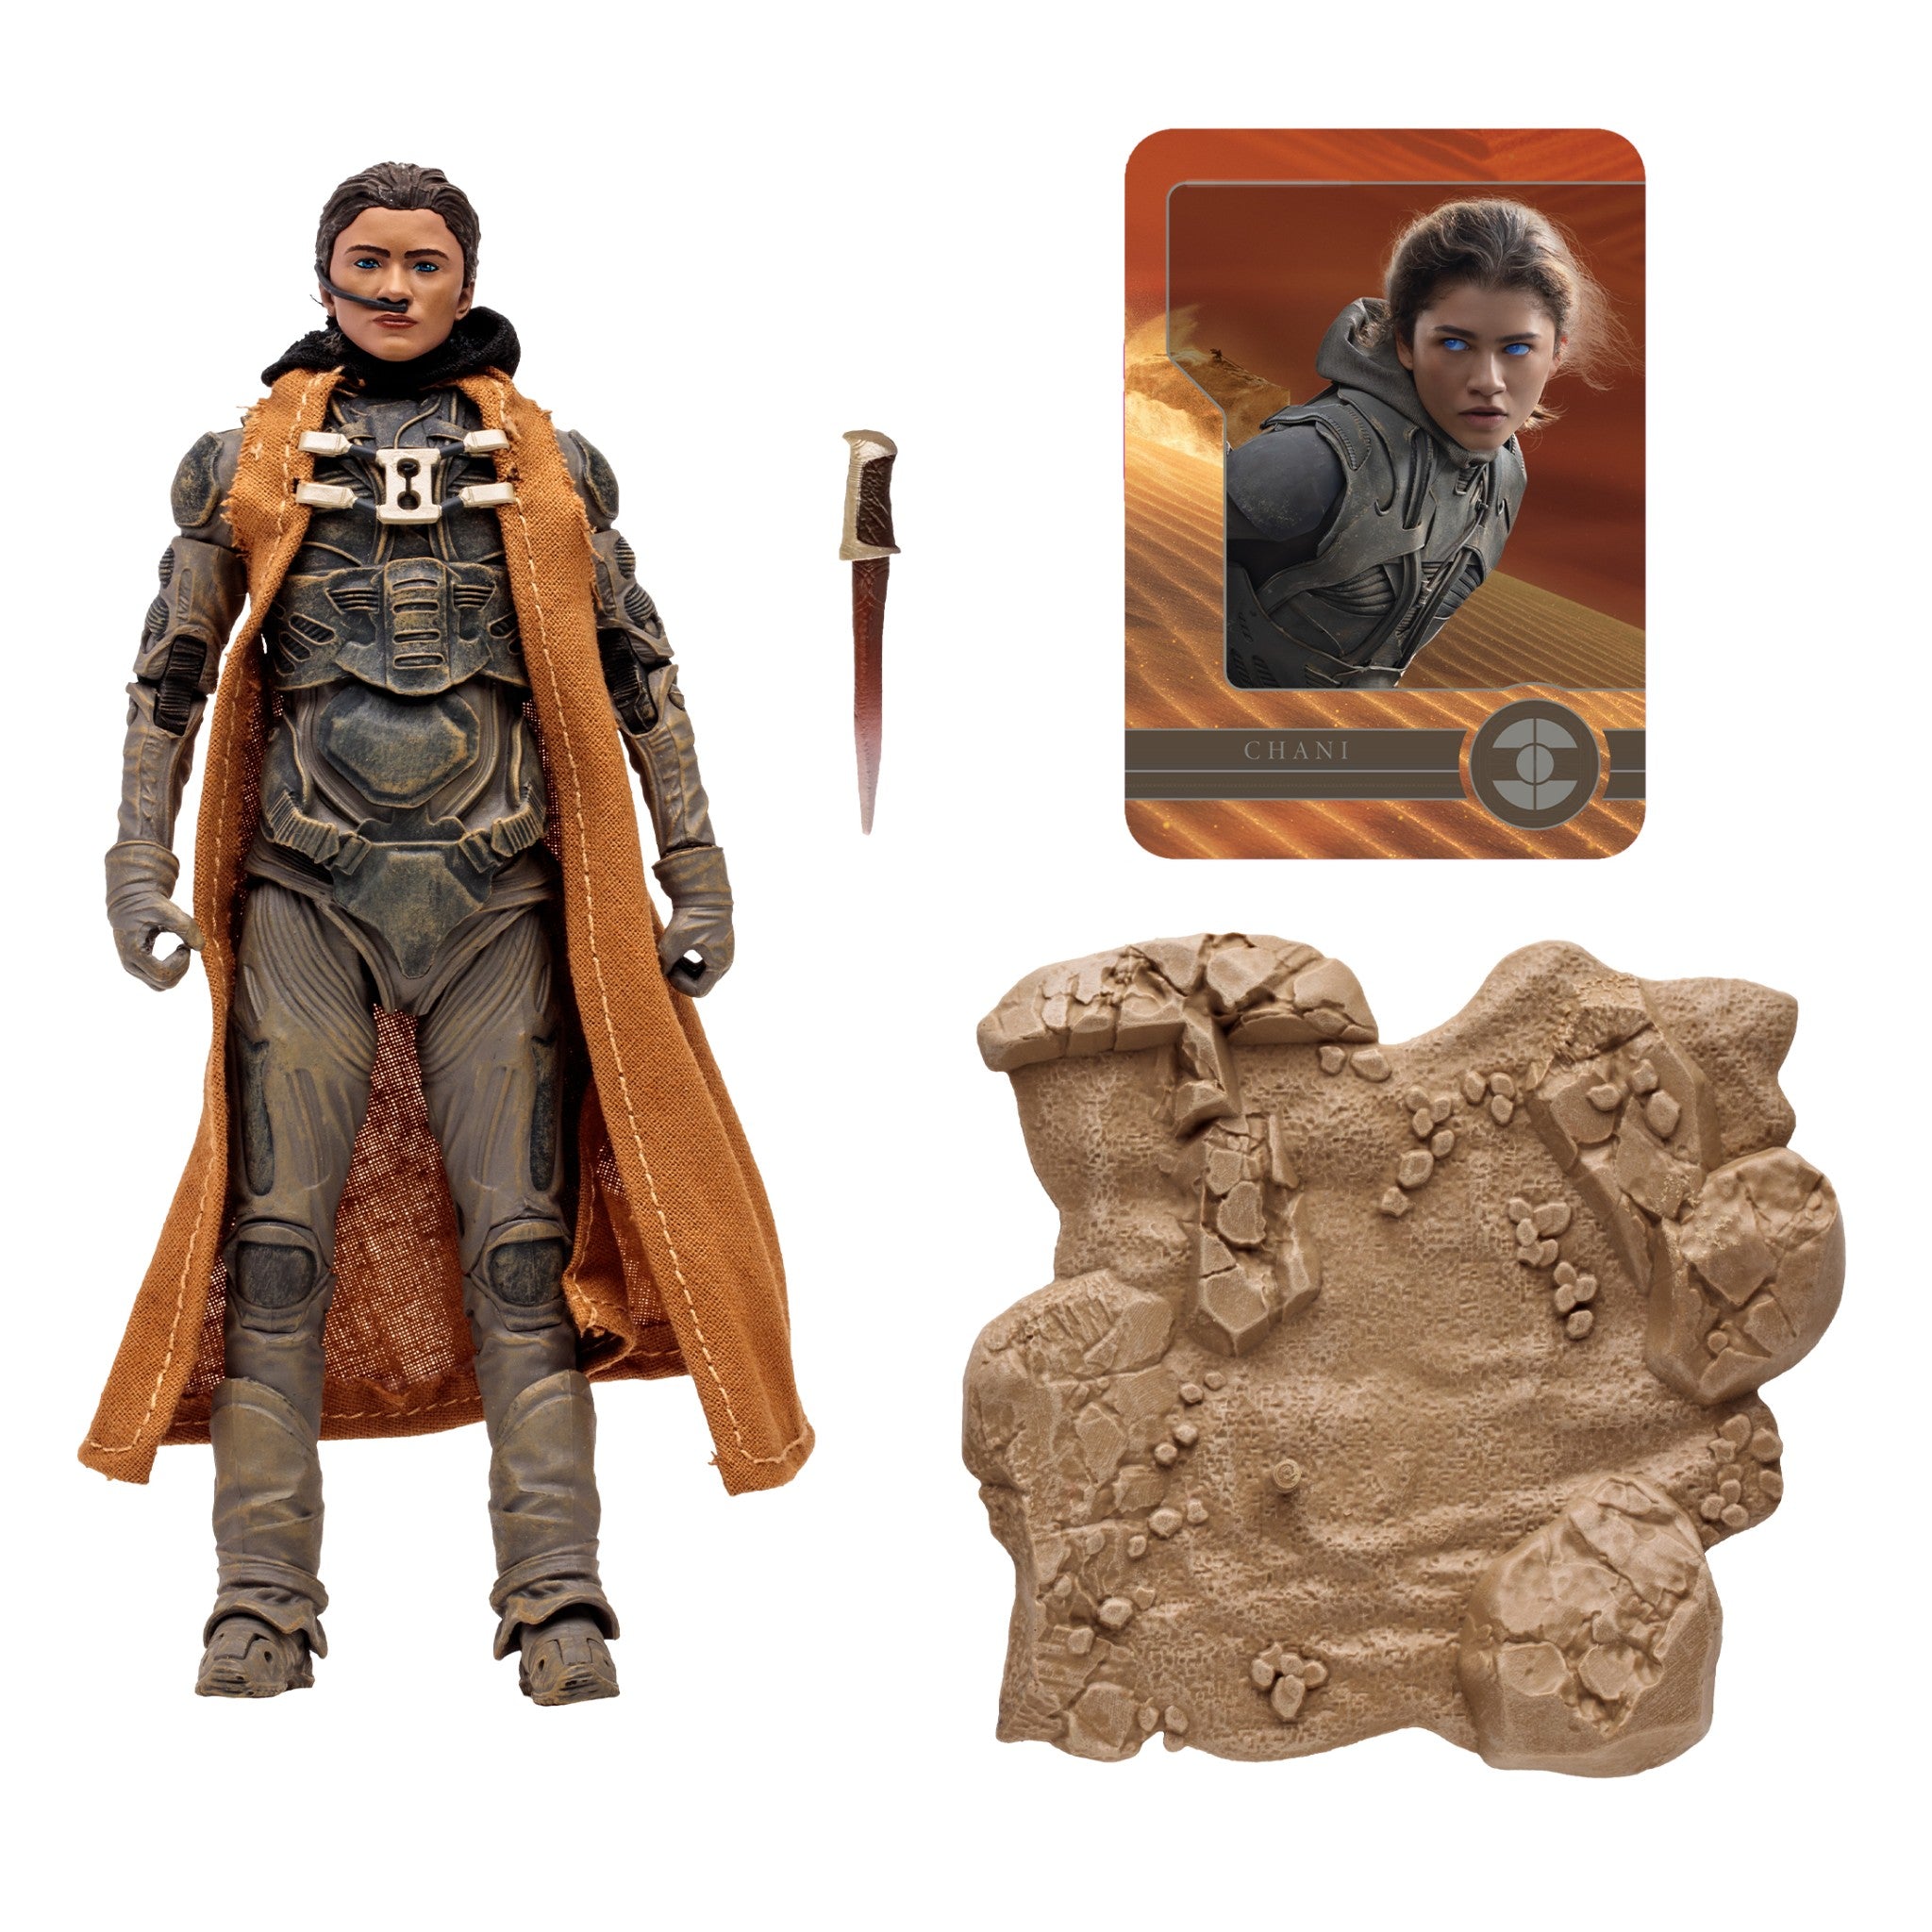 Dune Movie Part Two 2 Chani 7" Action Figure - McFarlane Toys - 0